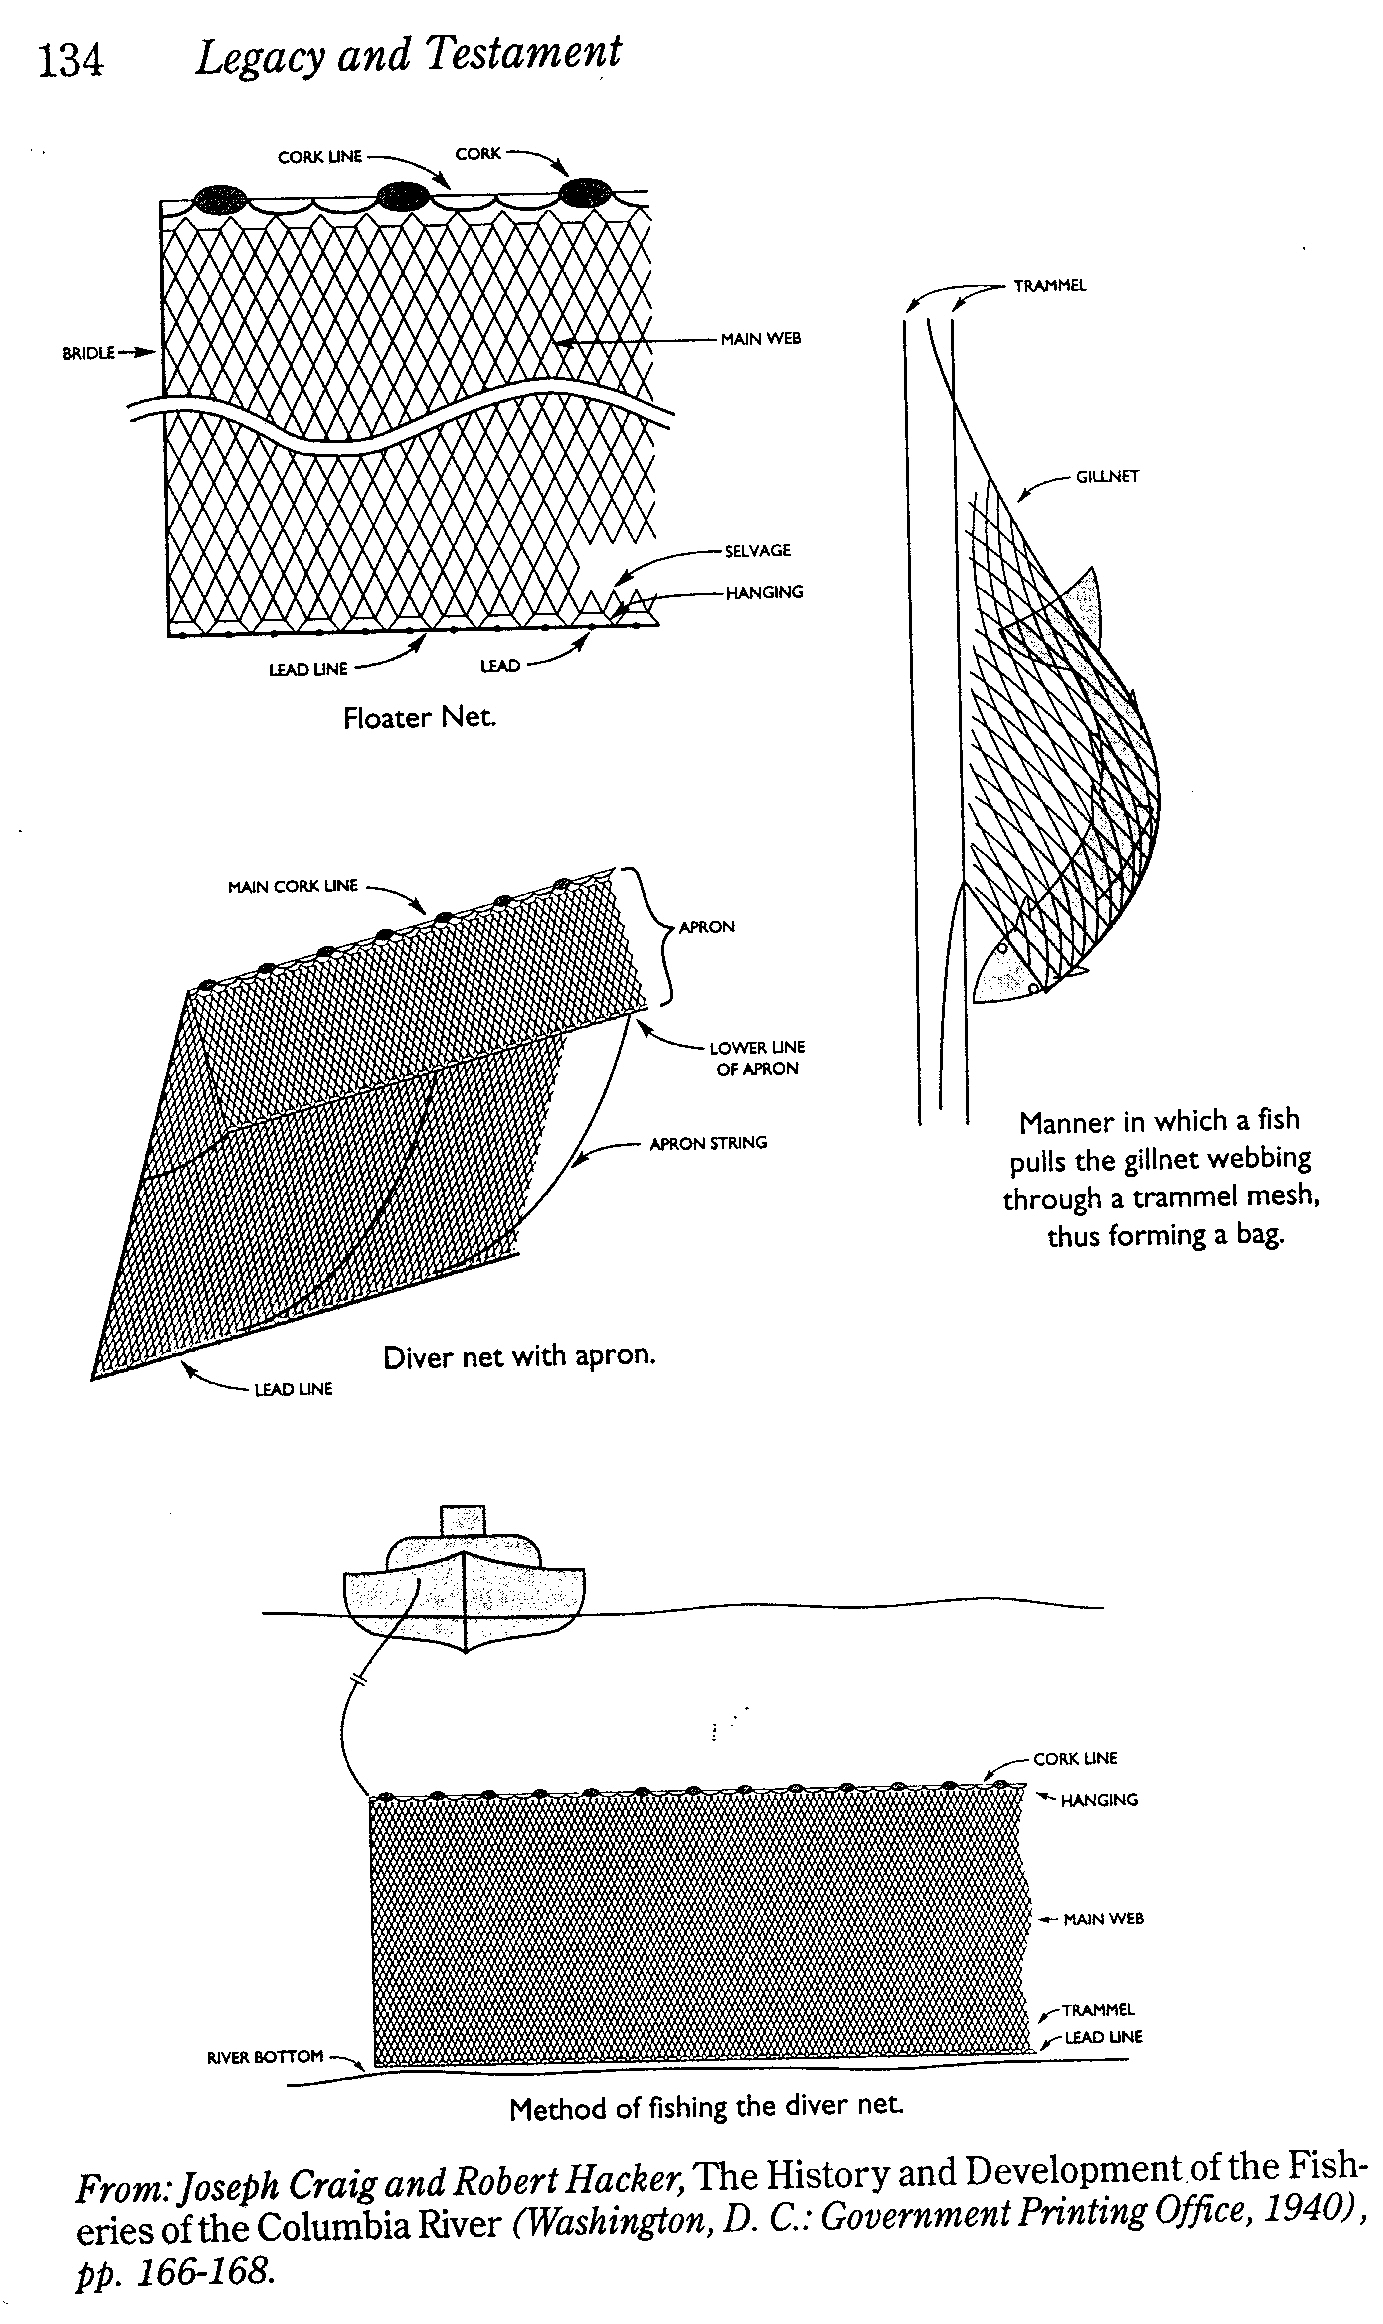 Schematic representation of the trammel nets used in the fishing area.